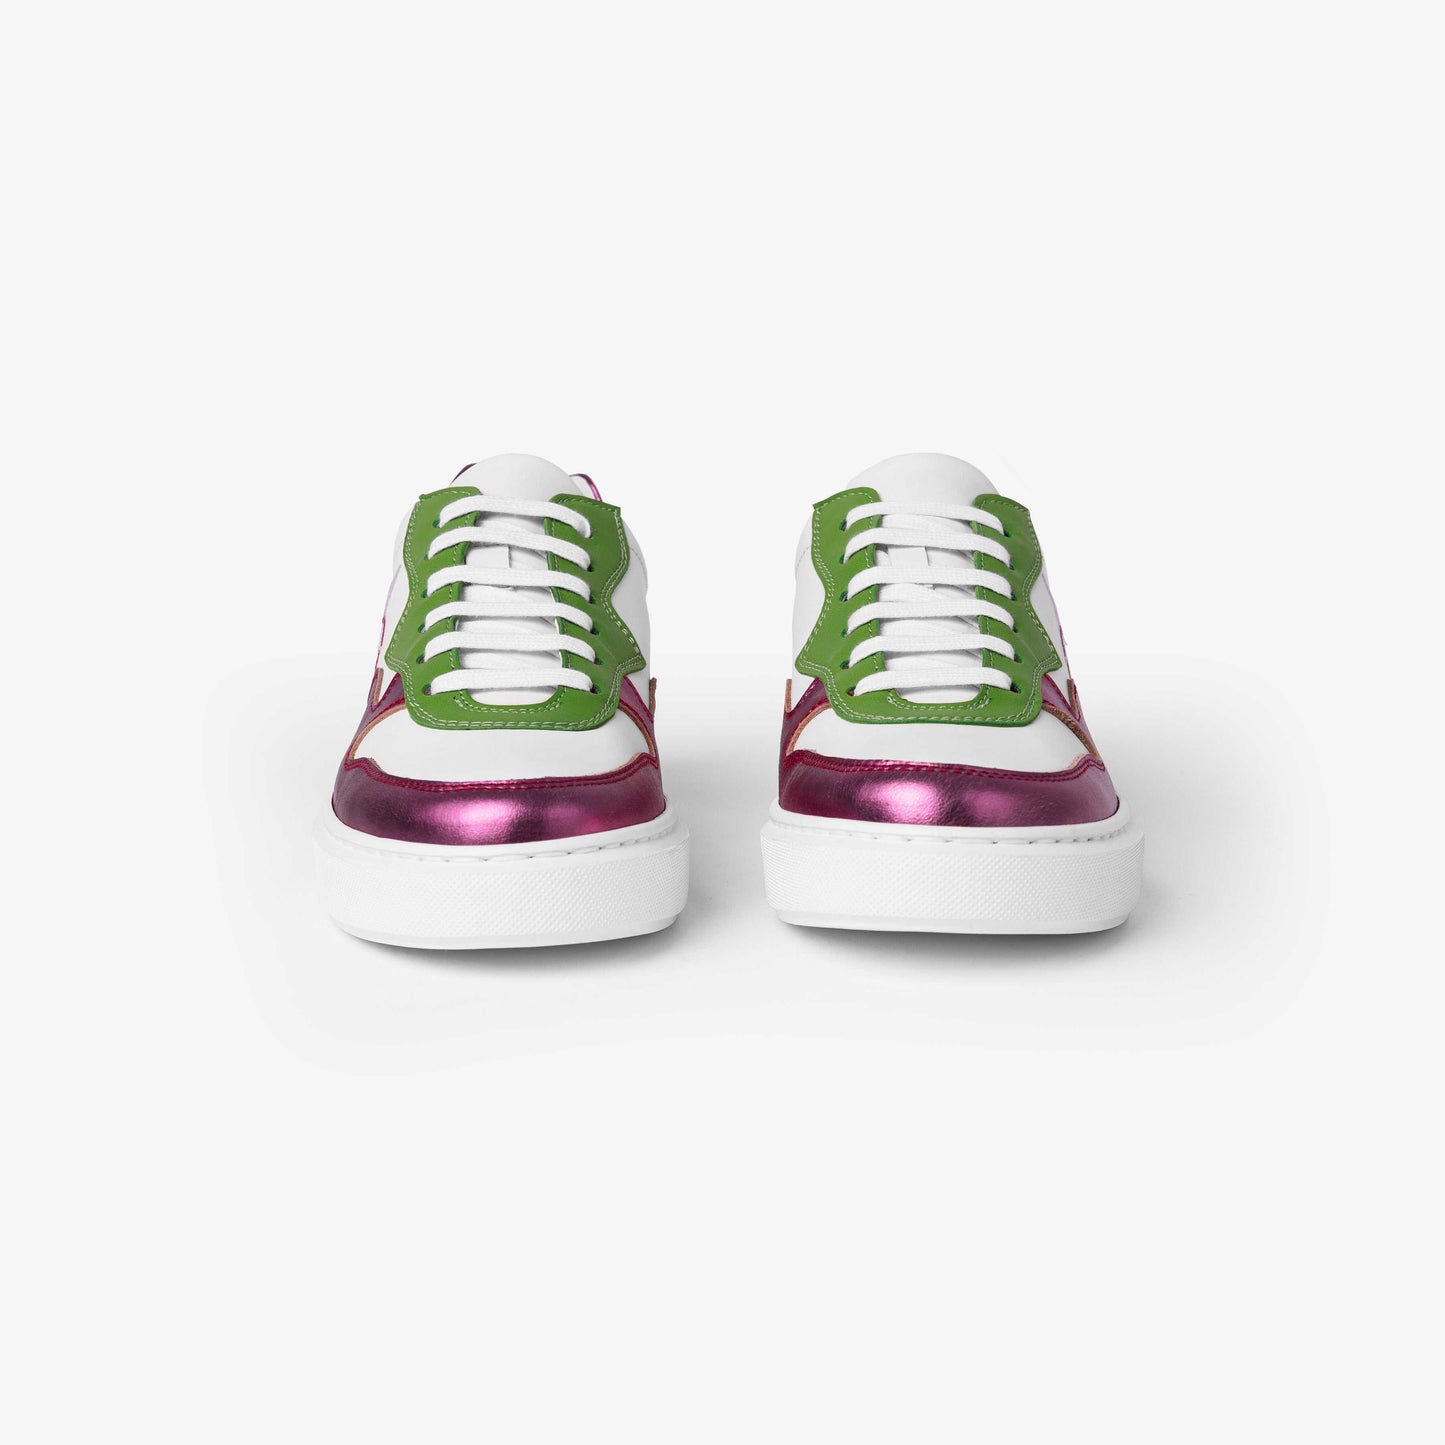 PINK AND GREEN SNEAKERS